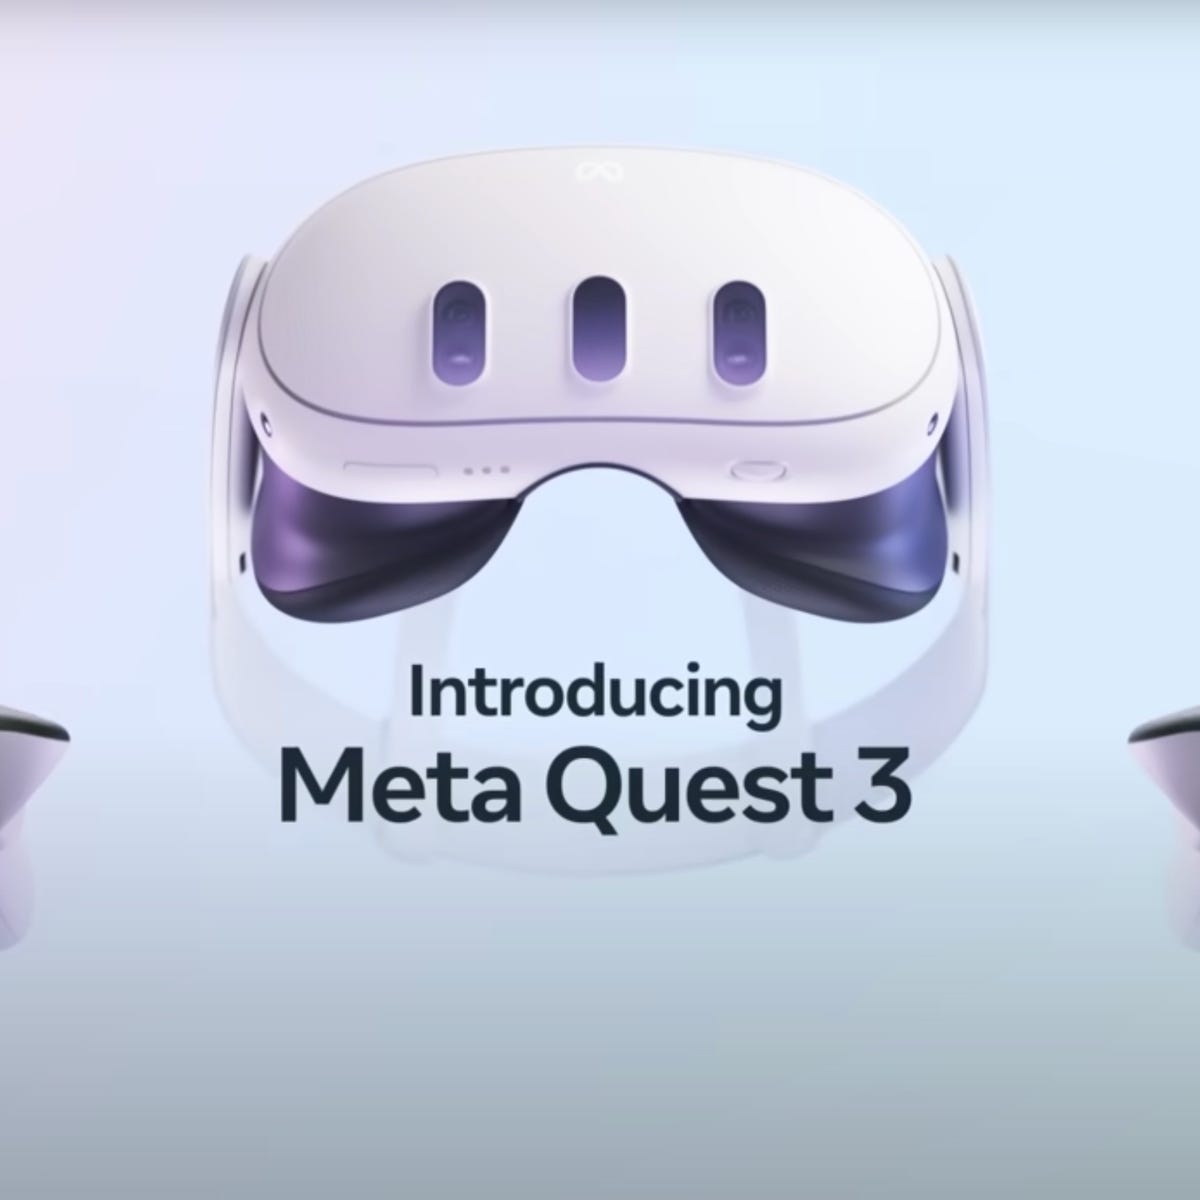 Should you Buy The Meta Quest 3? 